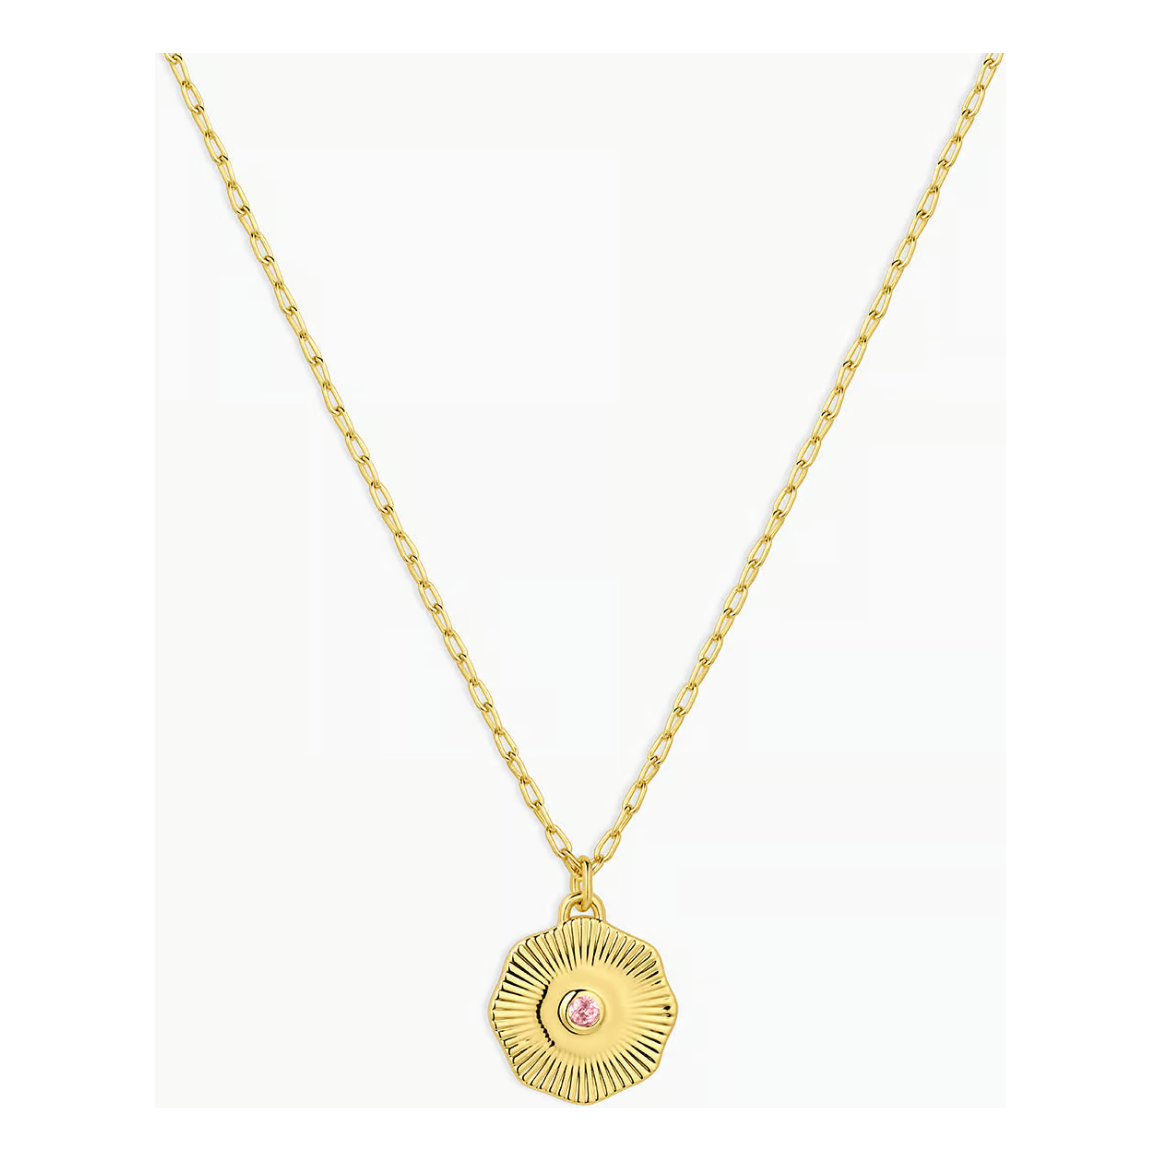 Birthstone Coin Necklace - October